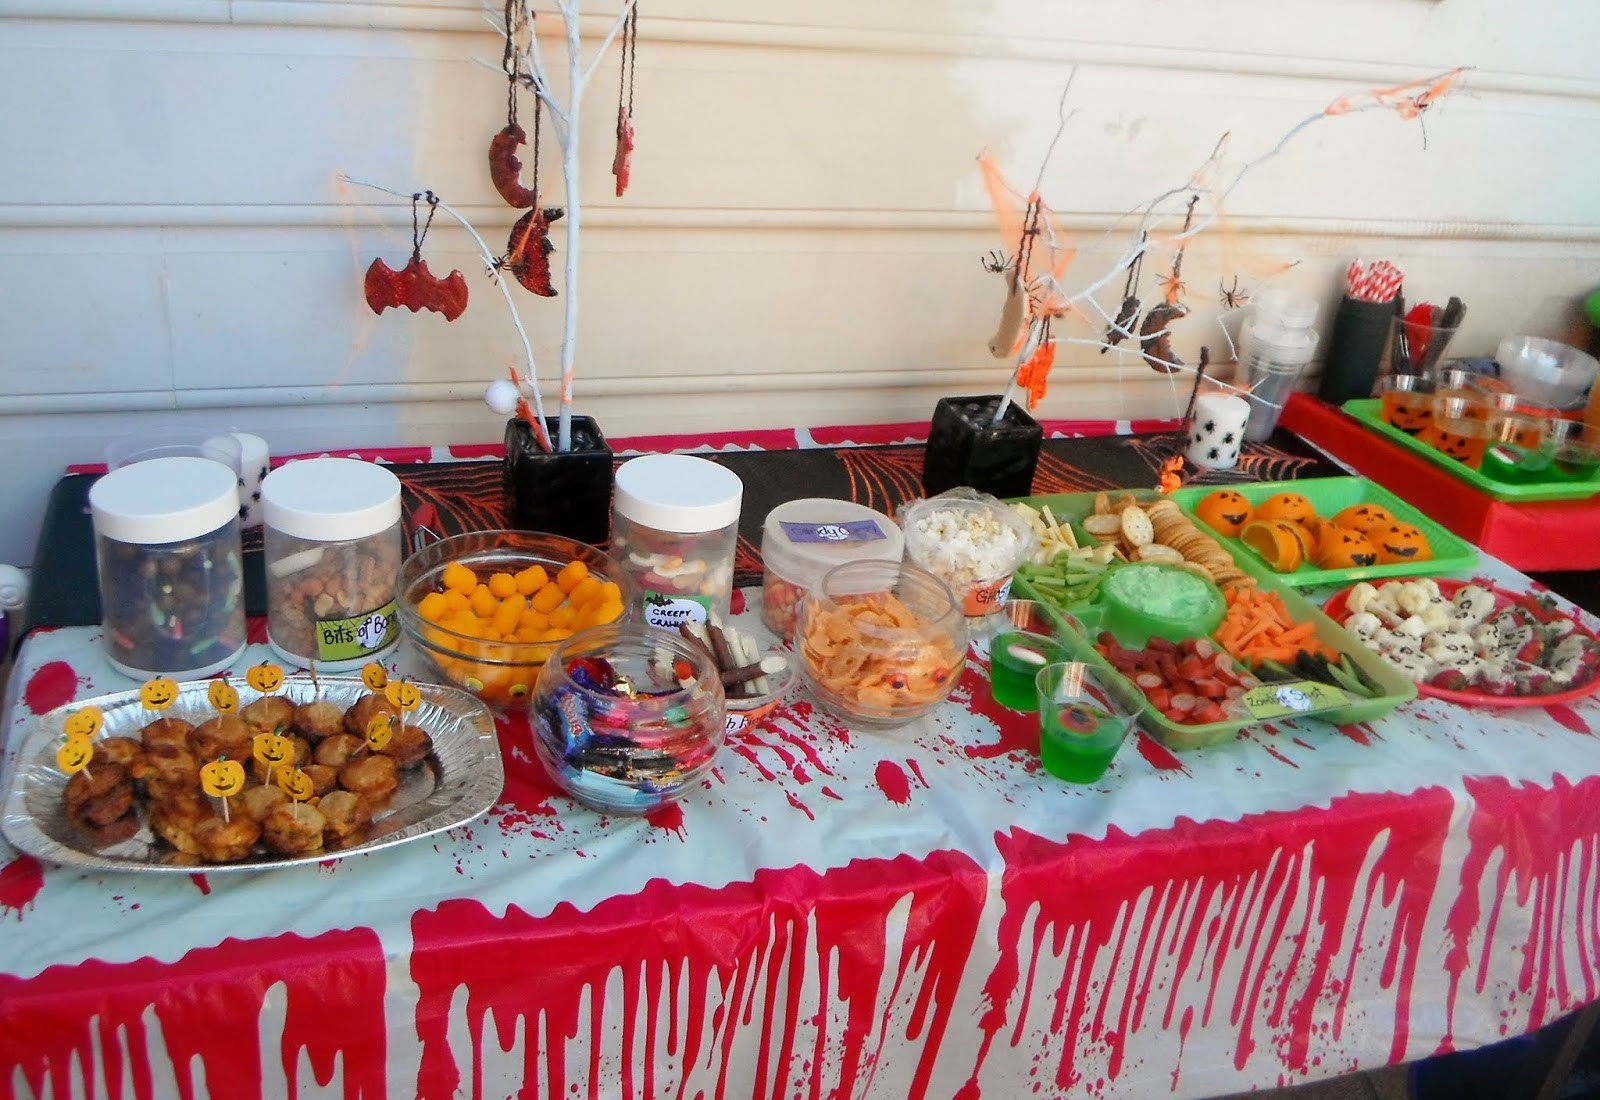 Kids Party Food Ideas Buffet
 Adventures at home with Mum Halloween Party Food